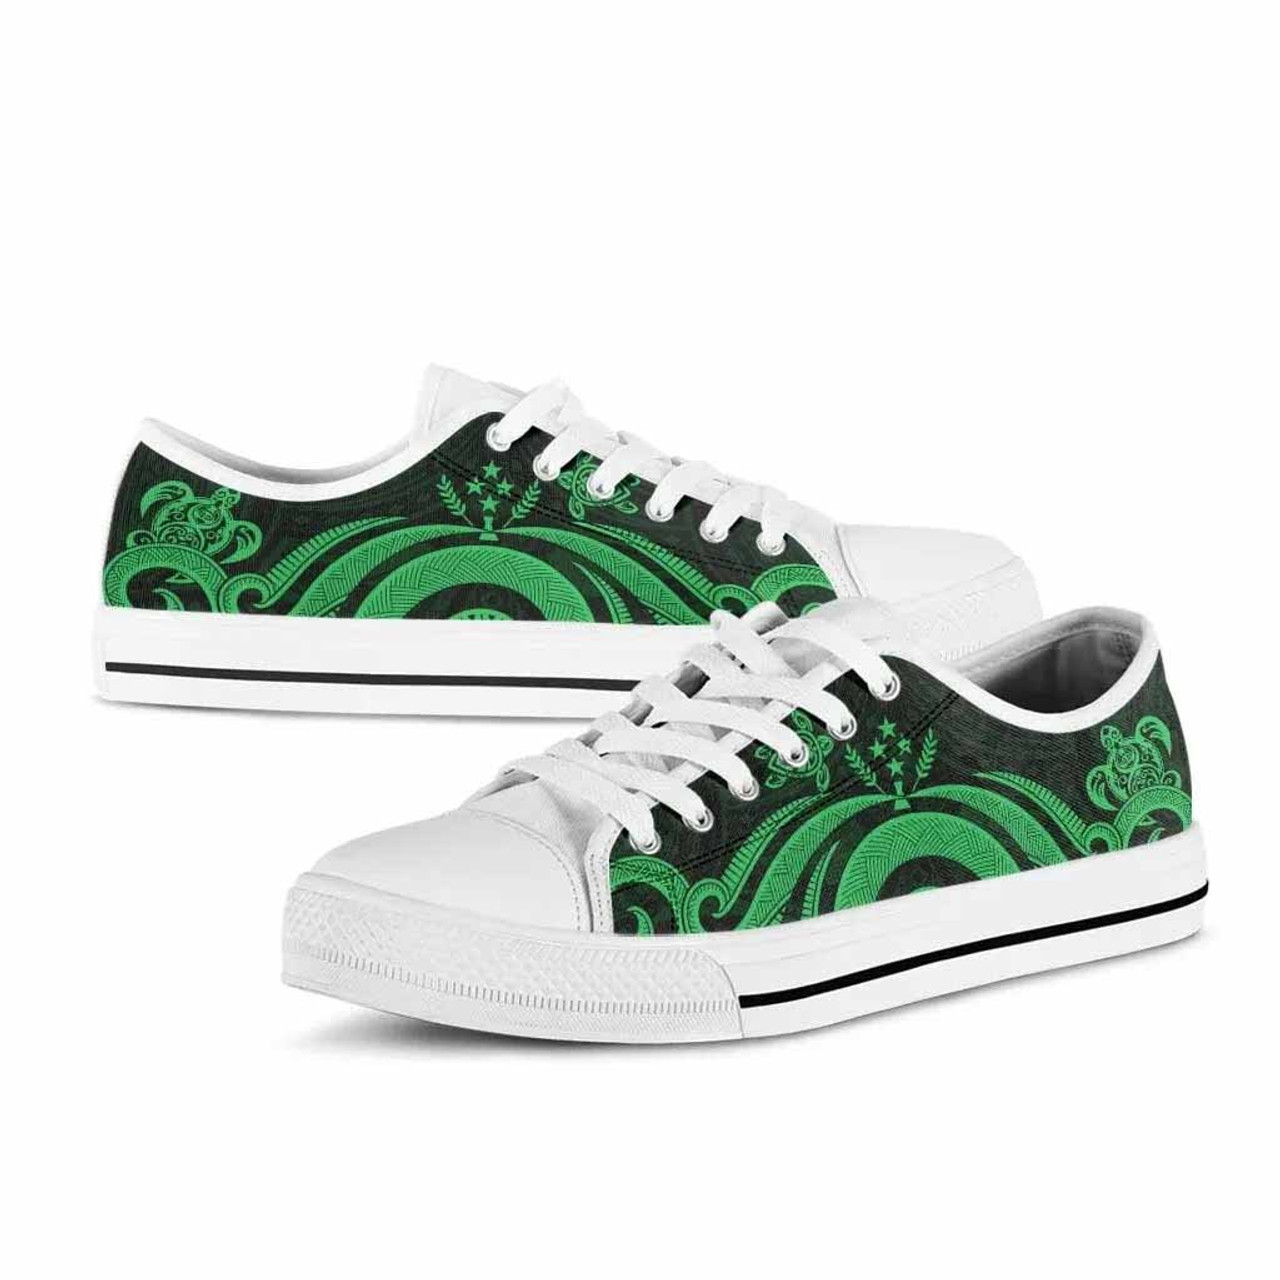 Kosrae Low Top Canvas Shoes - Green Tentacle Turtle 7